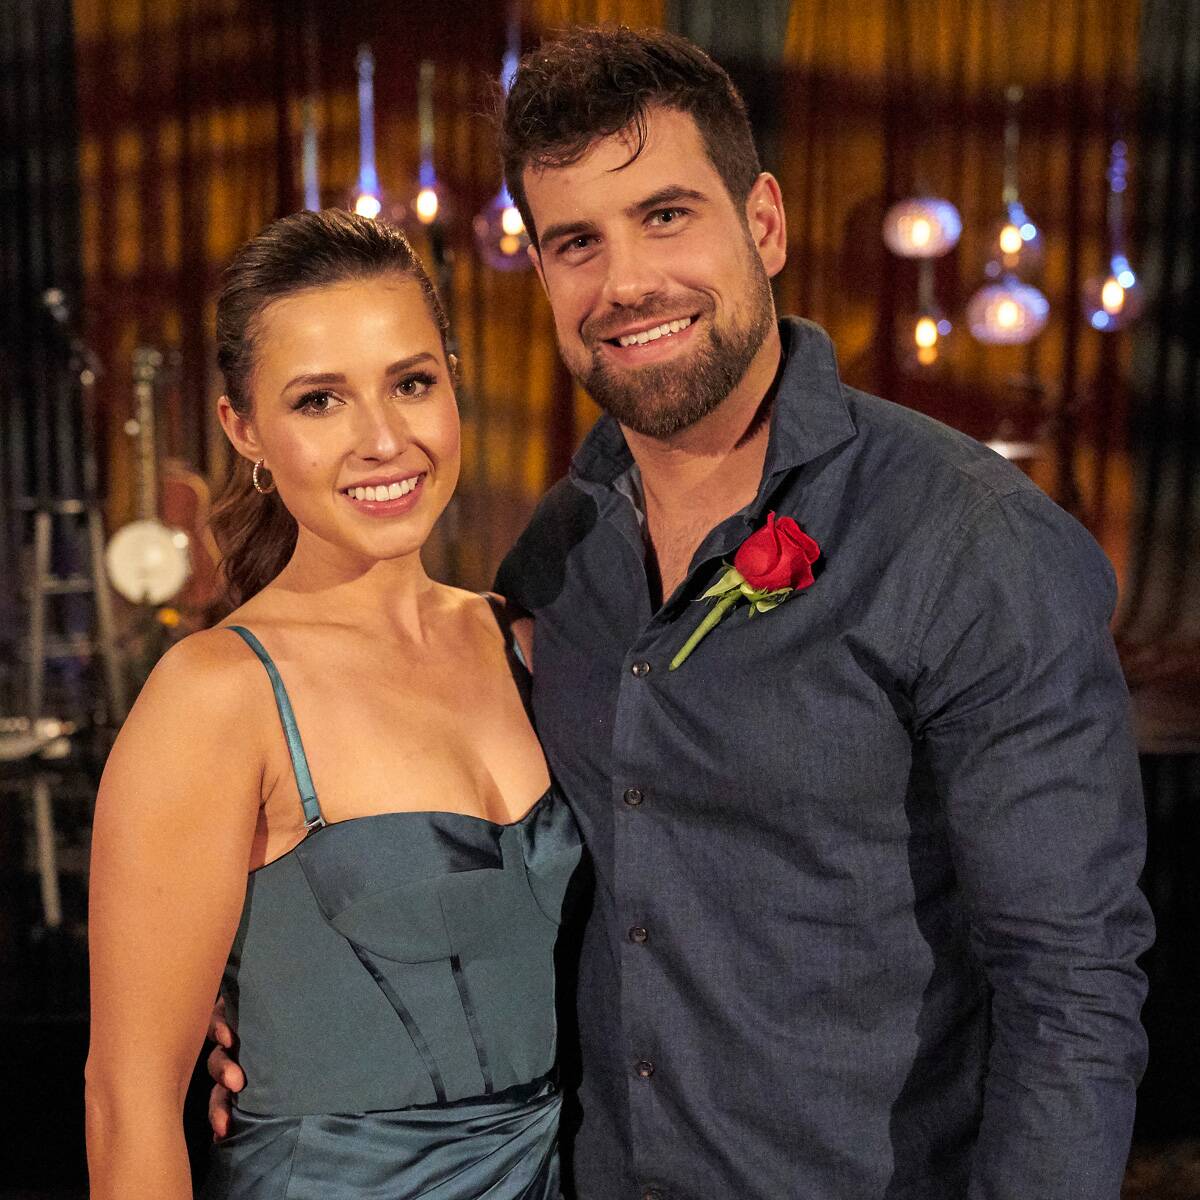 Katie Thurston and Blake Moynes Speak Out for the First Time Since Bachelorette Engagement